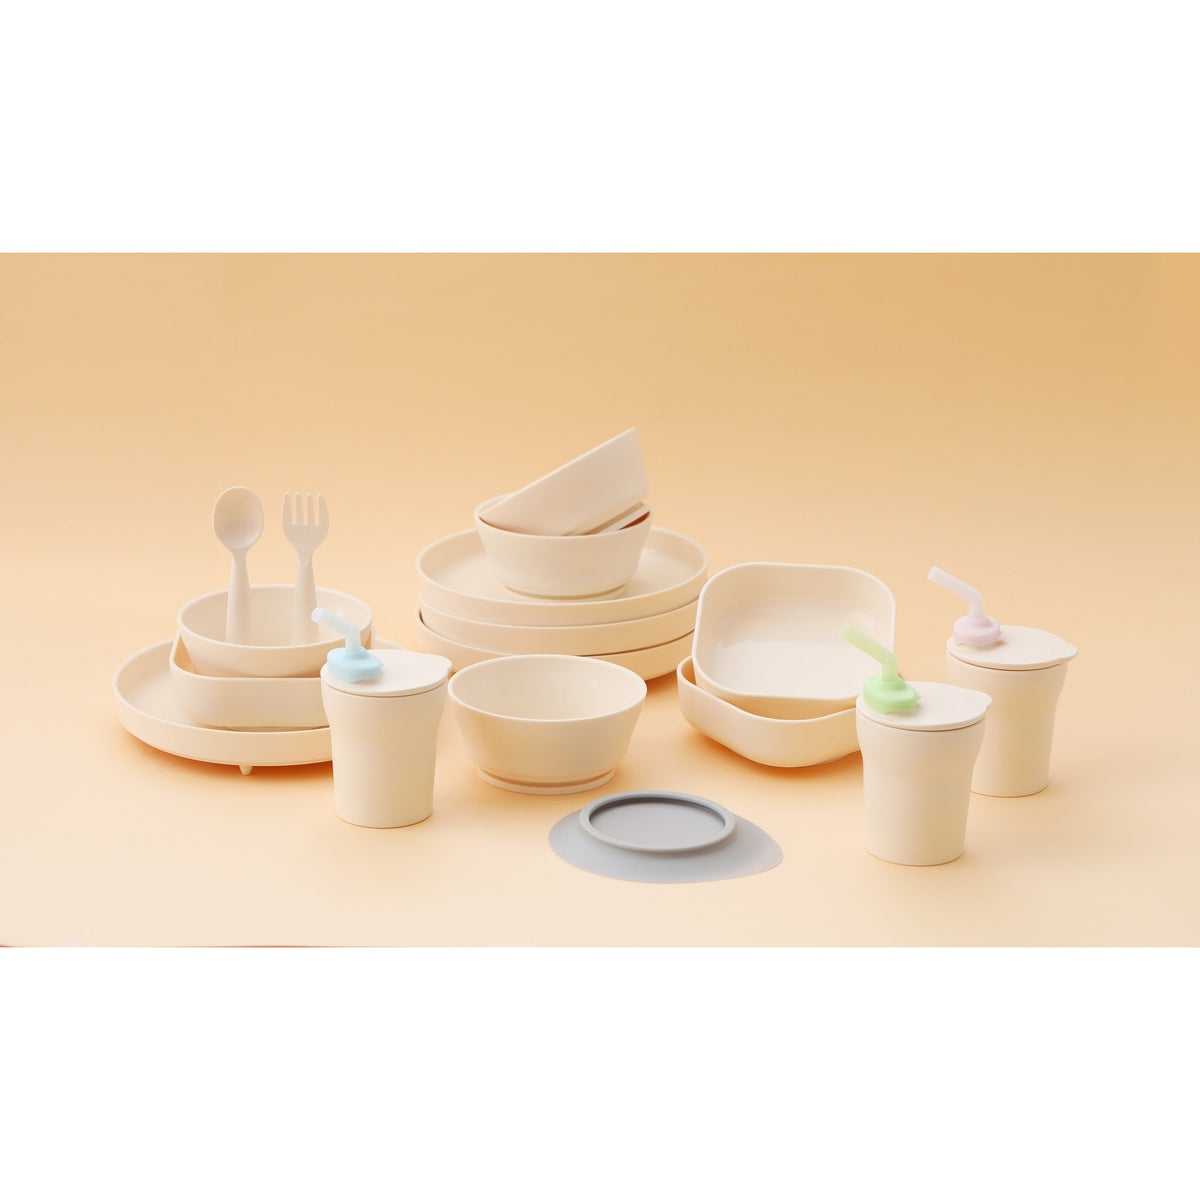 miniware-healthy-meal-set-pla-smart-divider-suction-plate-in-vanilla-+-silicone-divider-in-cotton-candy- (14)